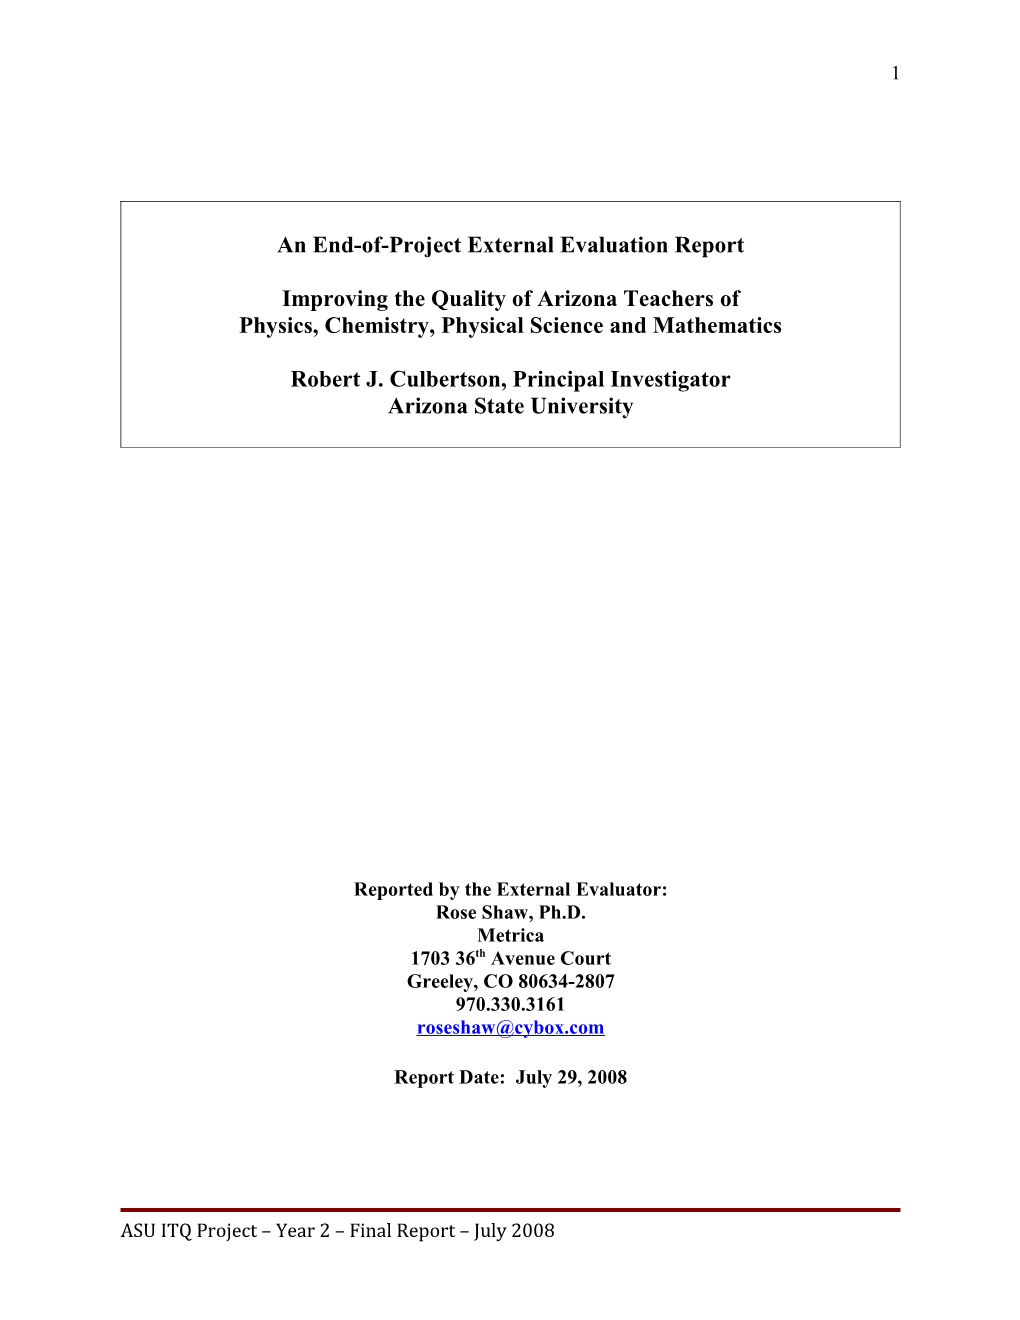 An End-Of-Project External Evaluation Report